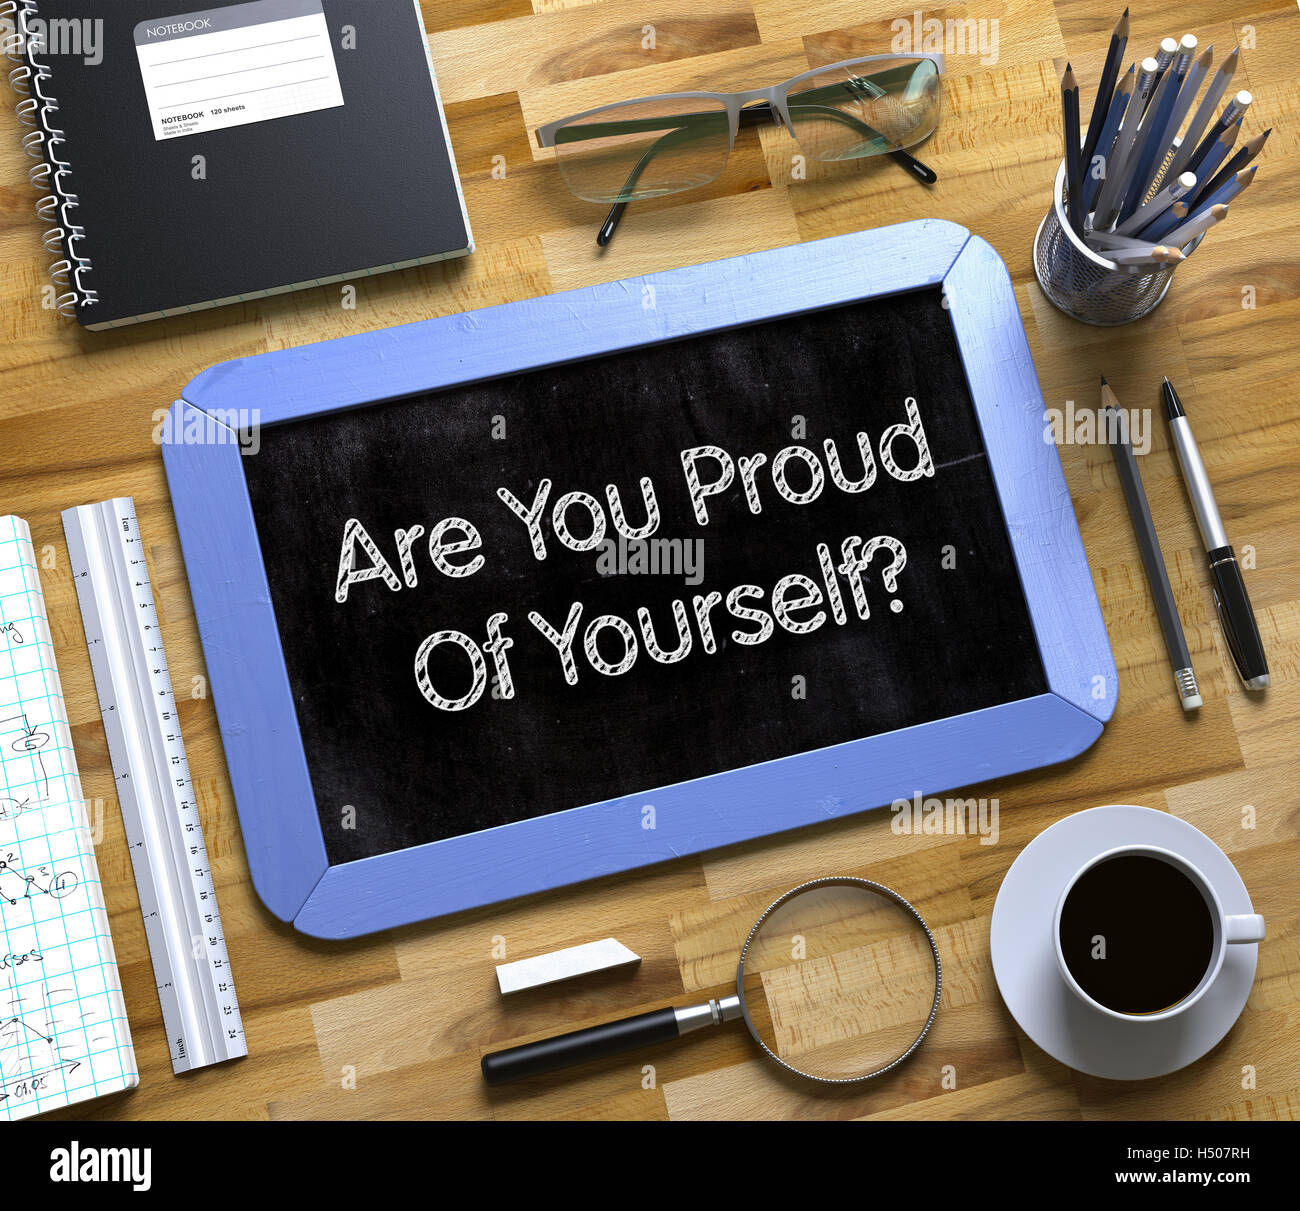 Are You Proud Of Yourself - Text on Small Chalkboard. 3D. Stock Photo